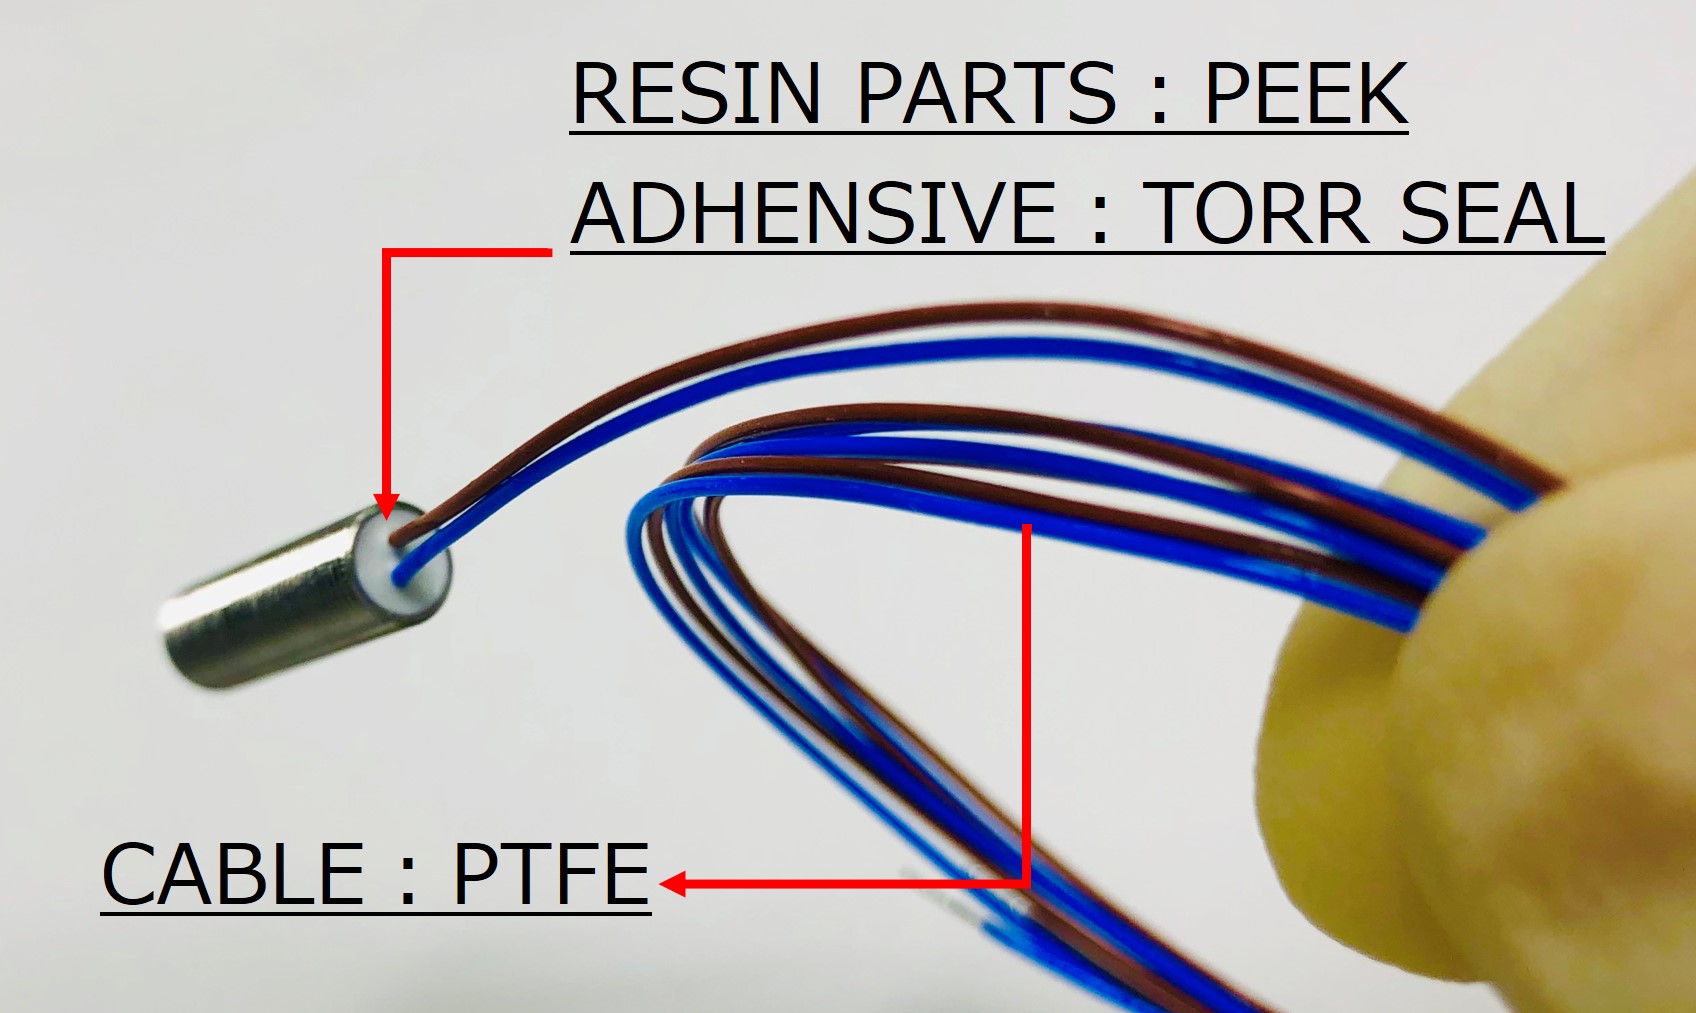 RESIN PARTS